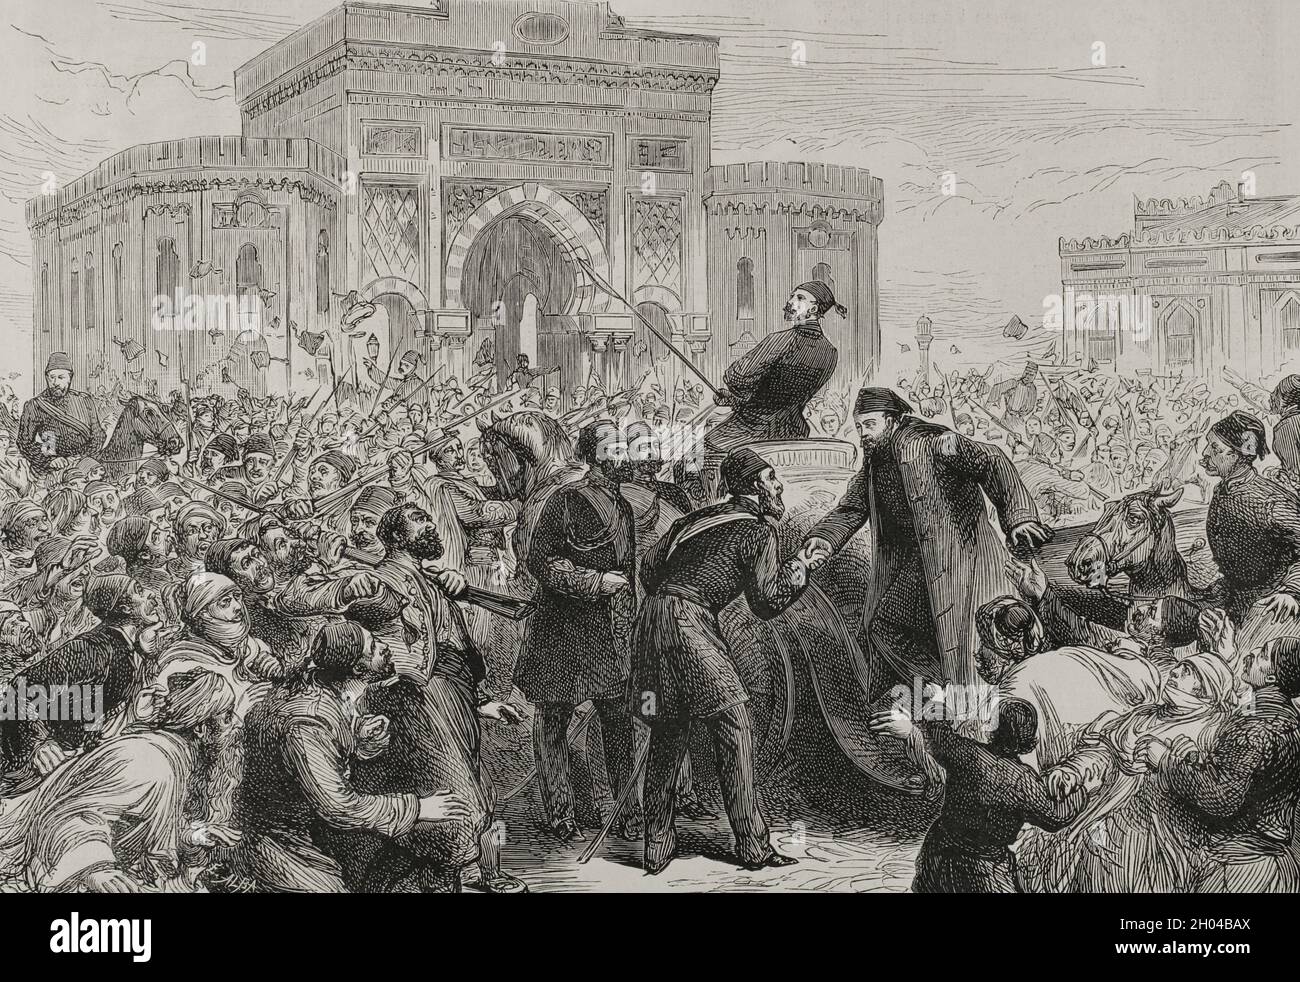 Constantinople. Reception to Osman Nuri Pasha, accompanied by Reouf Pasha, on his entrance to the Ministry of War (Seraskierate), on March 26, 1878, after his meeting with the Sultan Abdülhamid II. Engraving. La Ilustración Española y Americana, 1878. Stock Photo